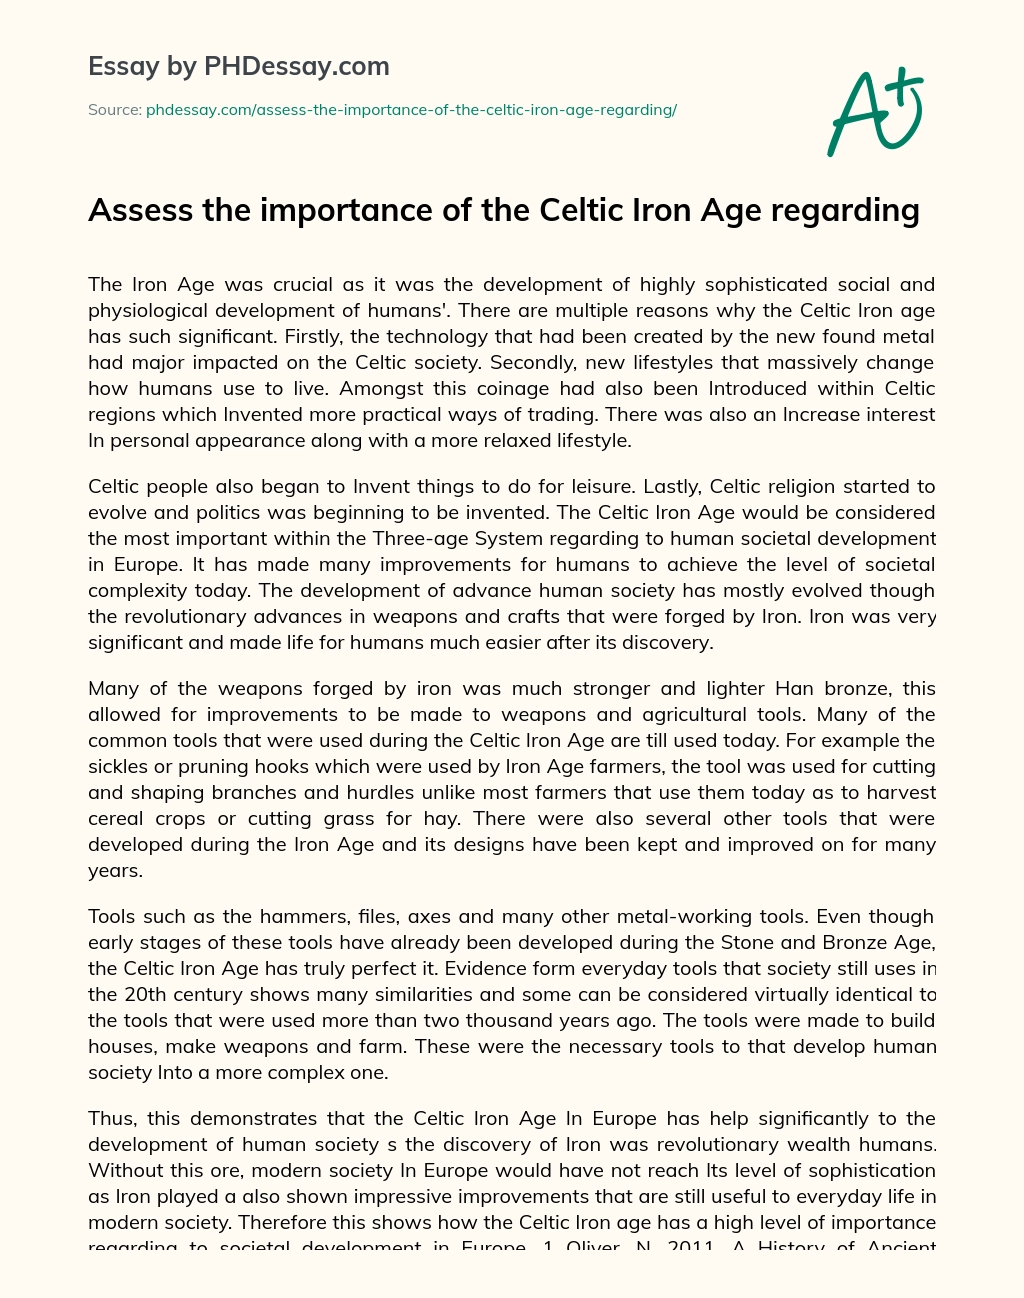 Assess the importance of the Celtic Iron Age regarding essay